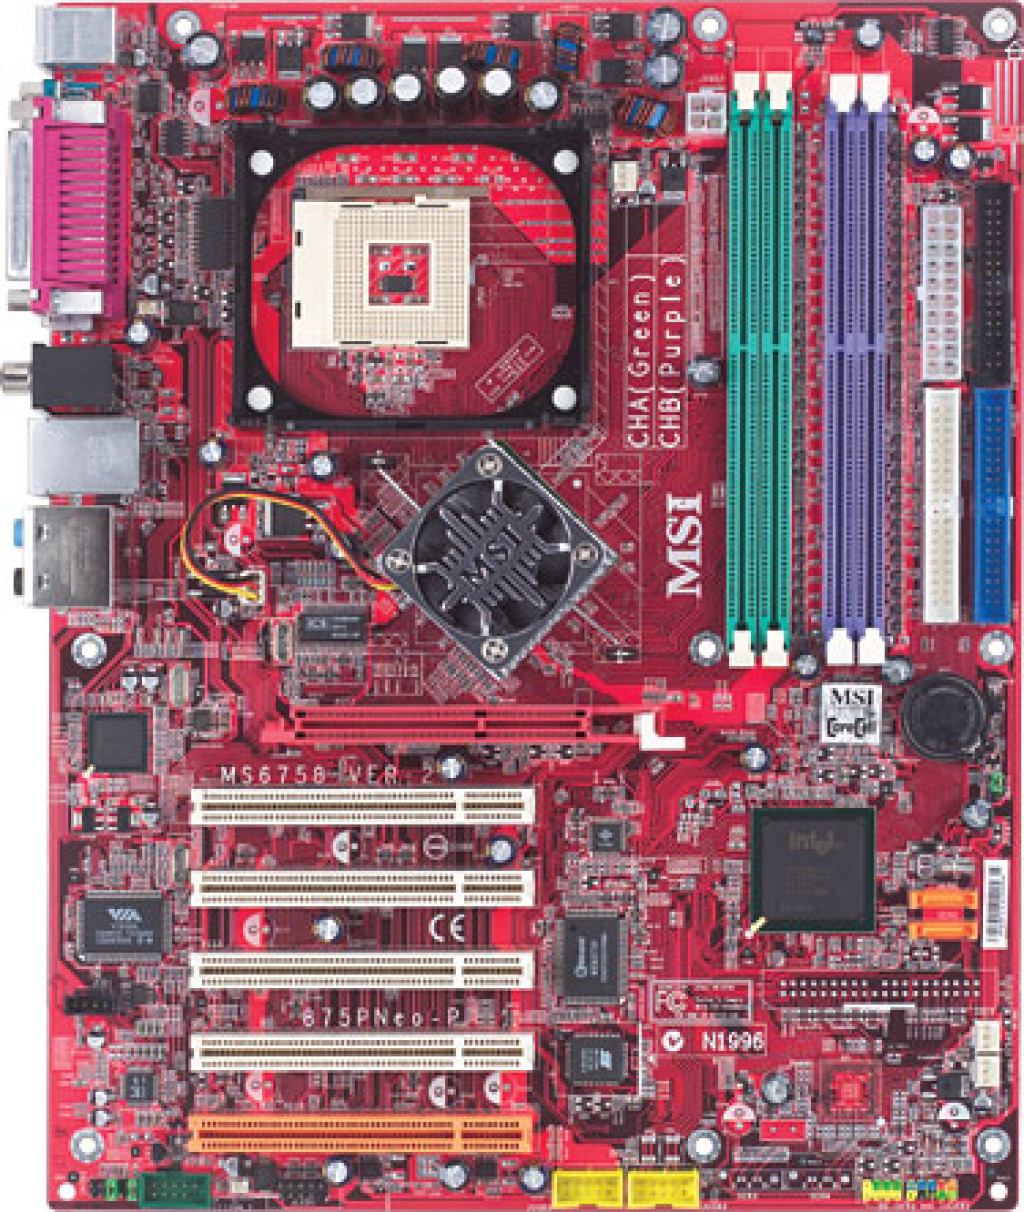 specification-875p-neo-fisr-pcb-2-0